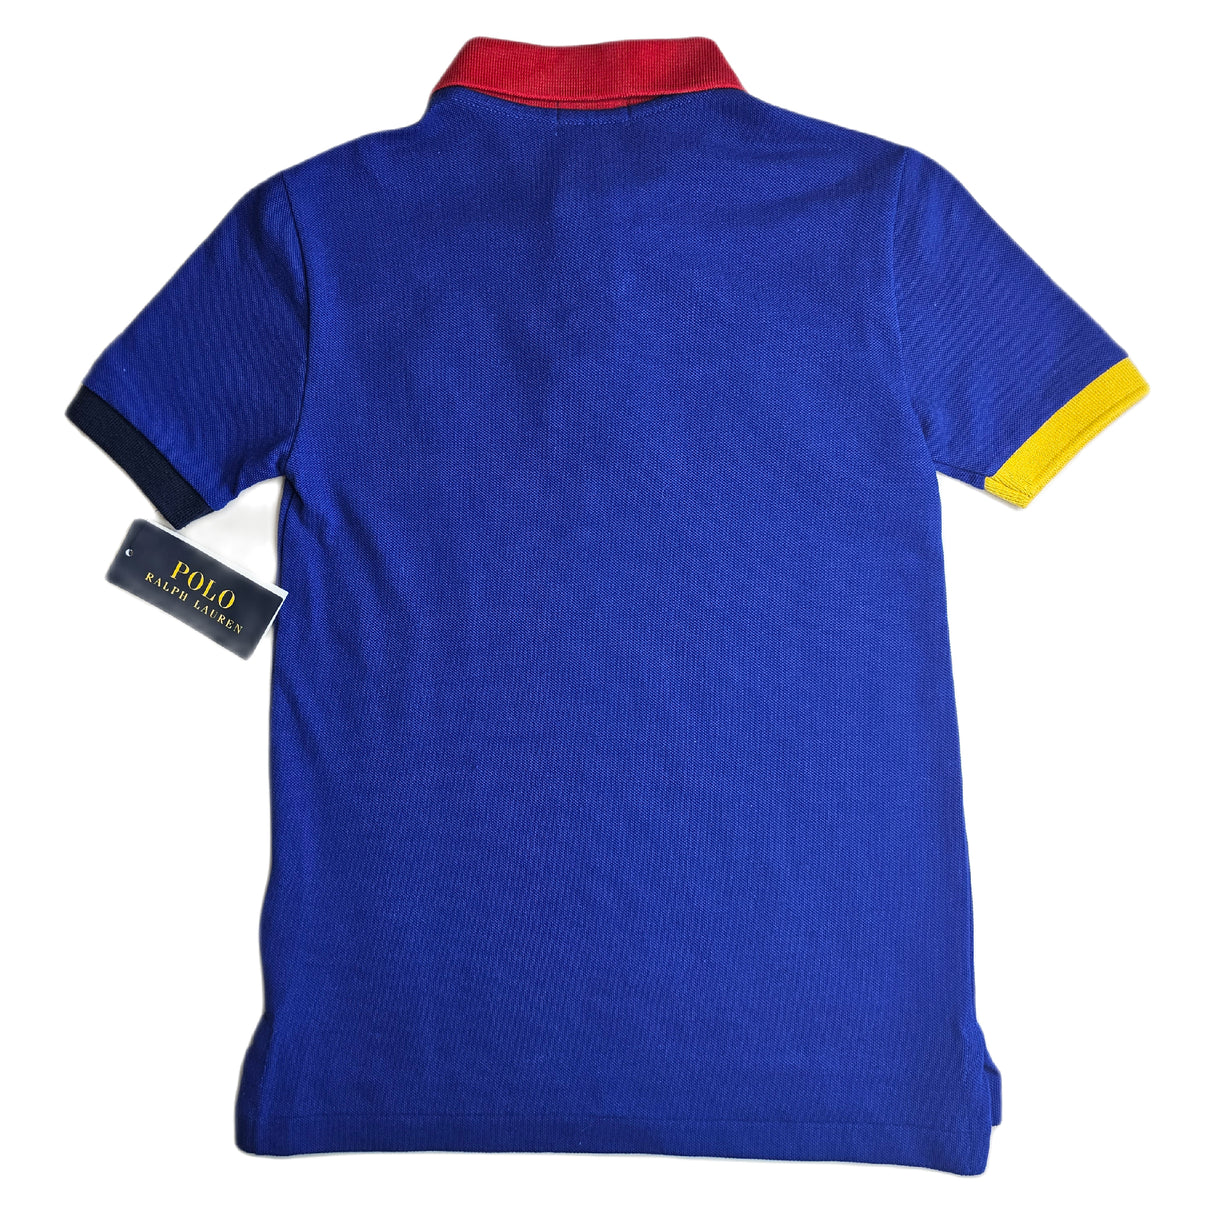 A Second Chance - Polo Ralph Lauren Blue  Shirt 7 Kids - Delivery All Over Lebanon